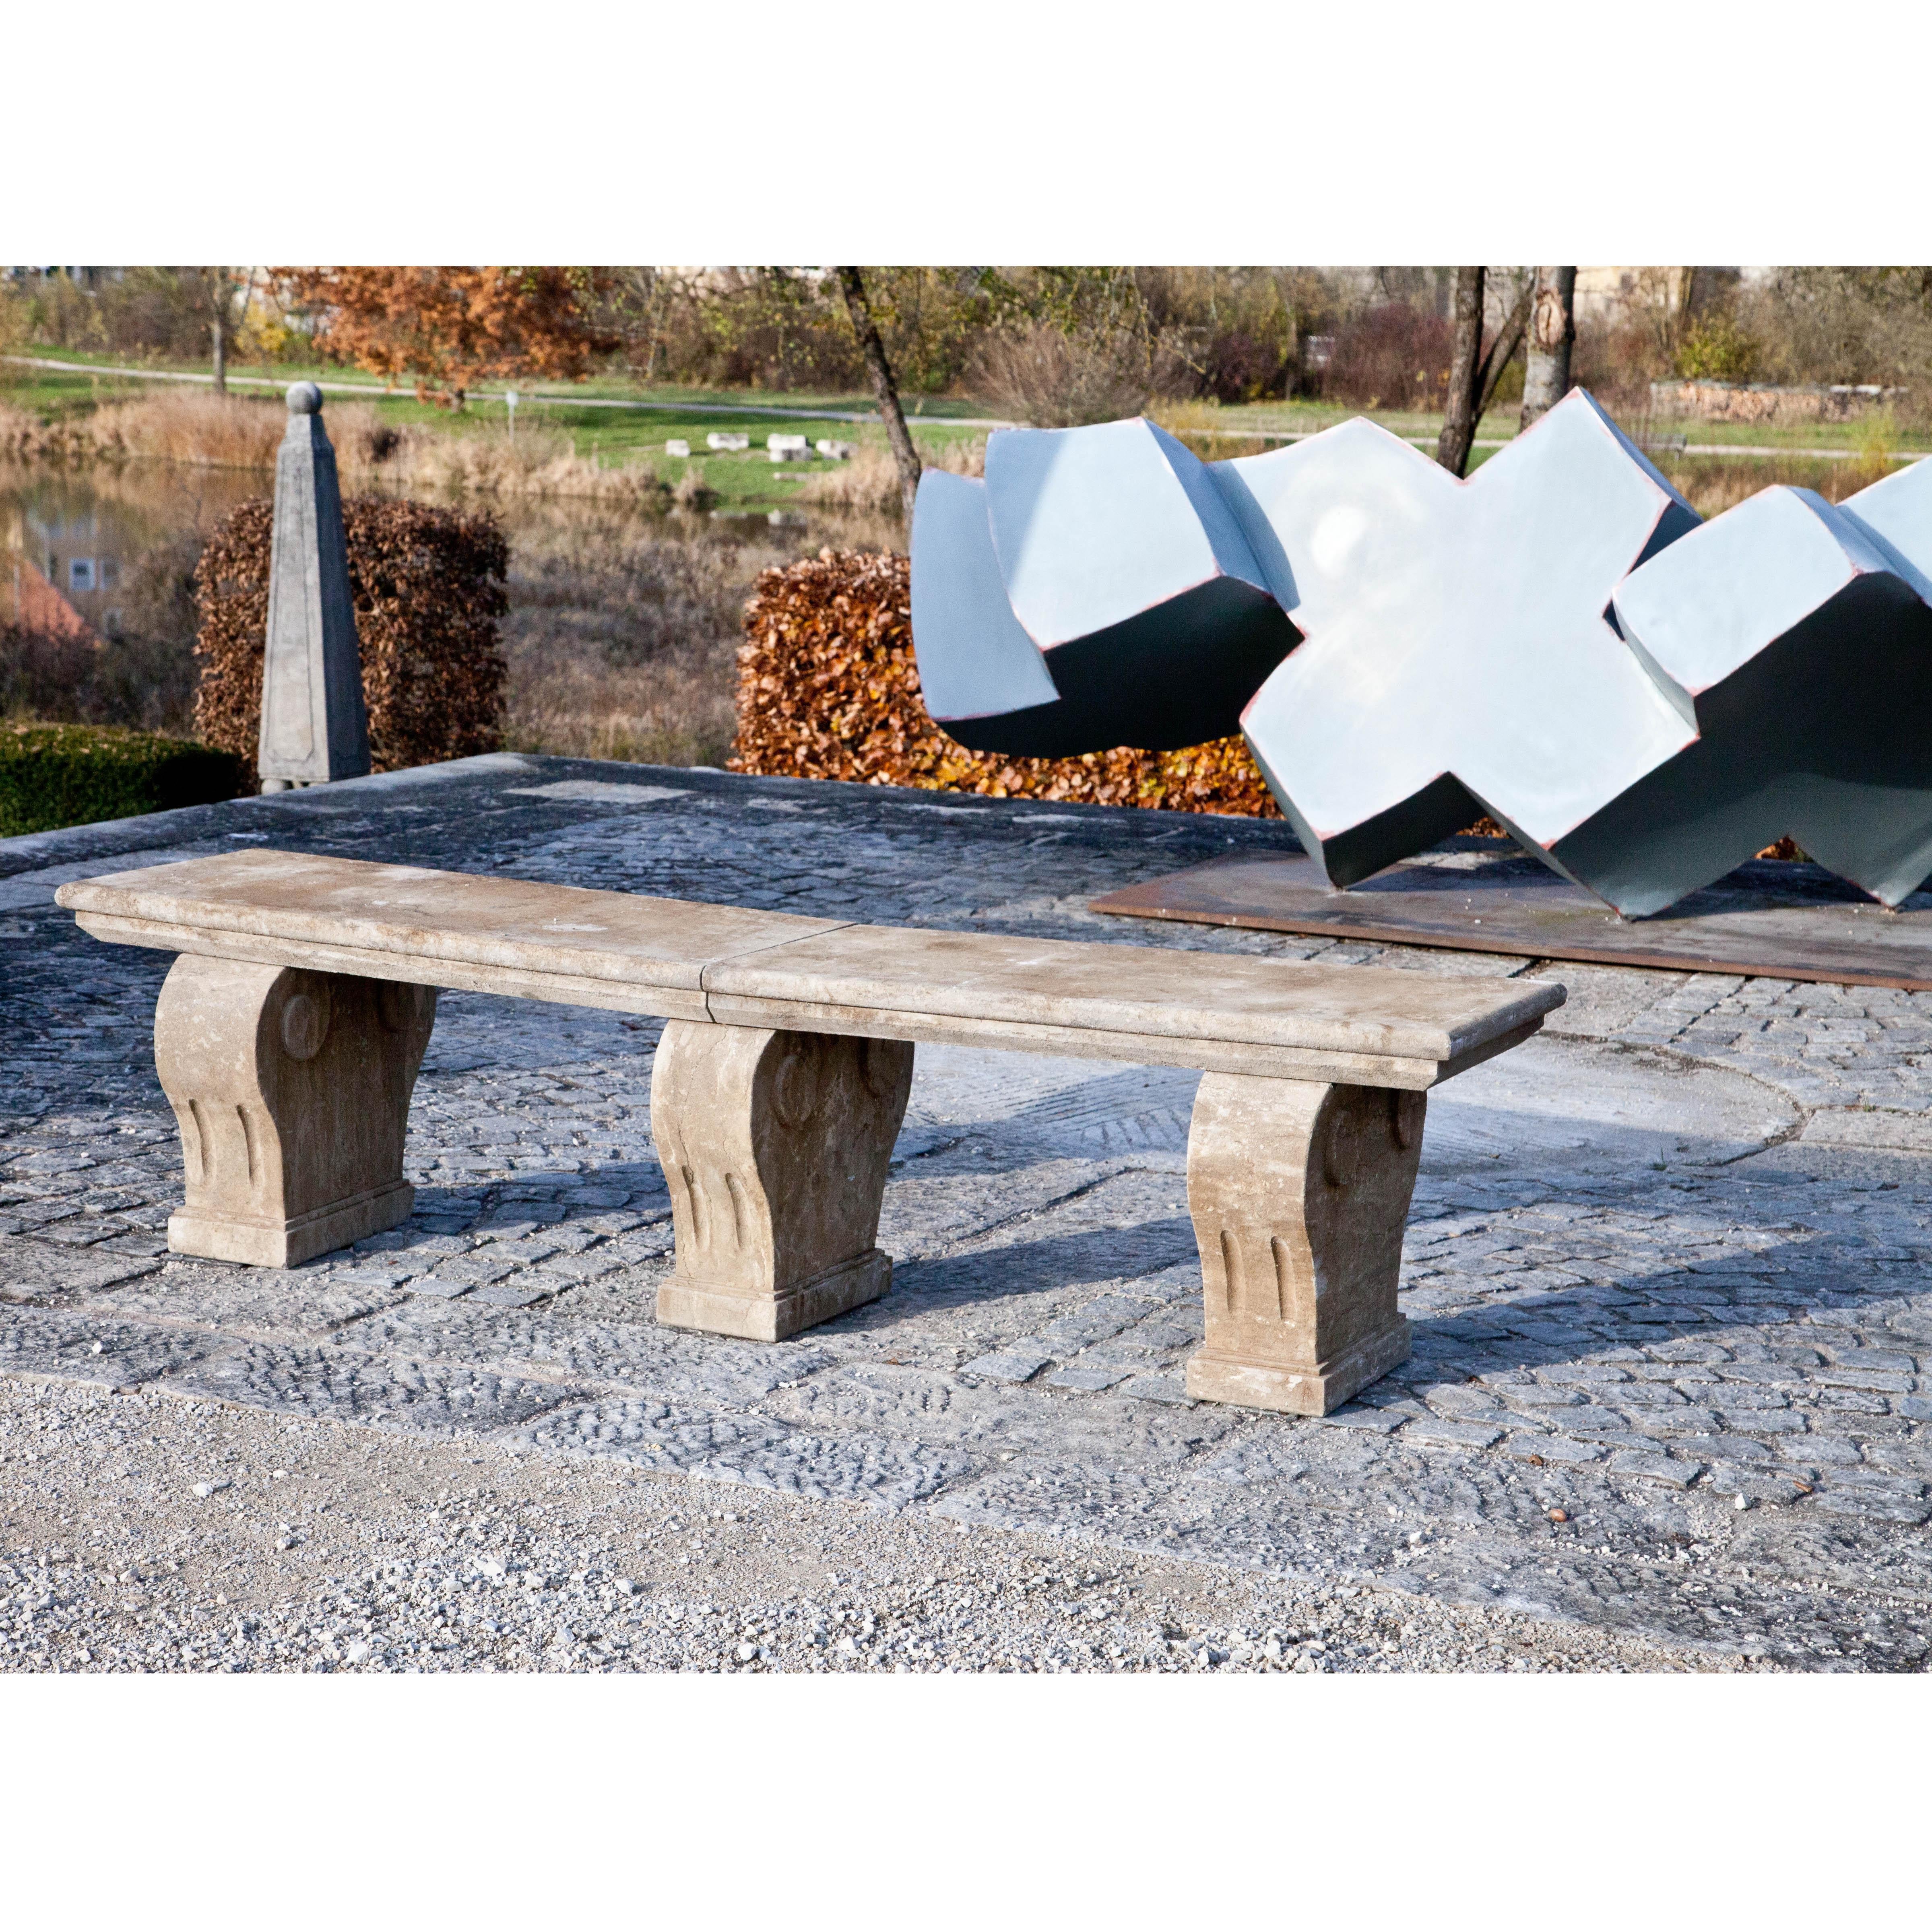 Park bench with rectangular seat on three curved legs, handmade of blue stone.